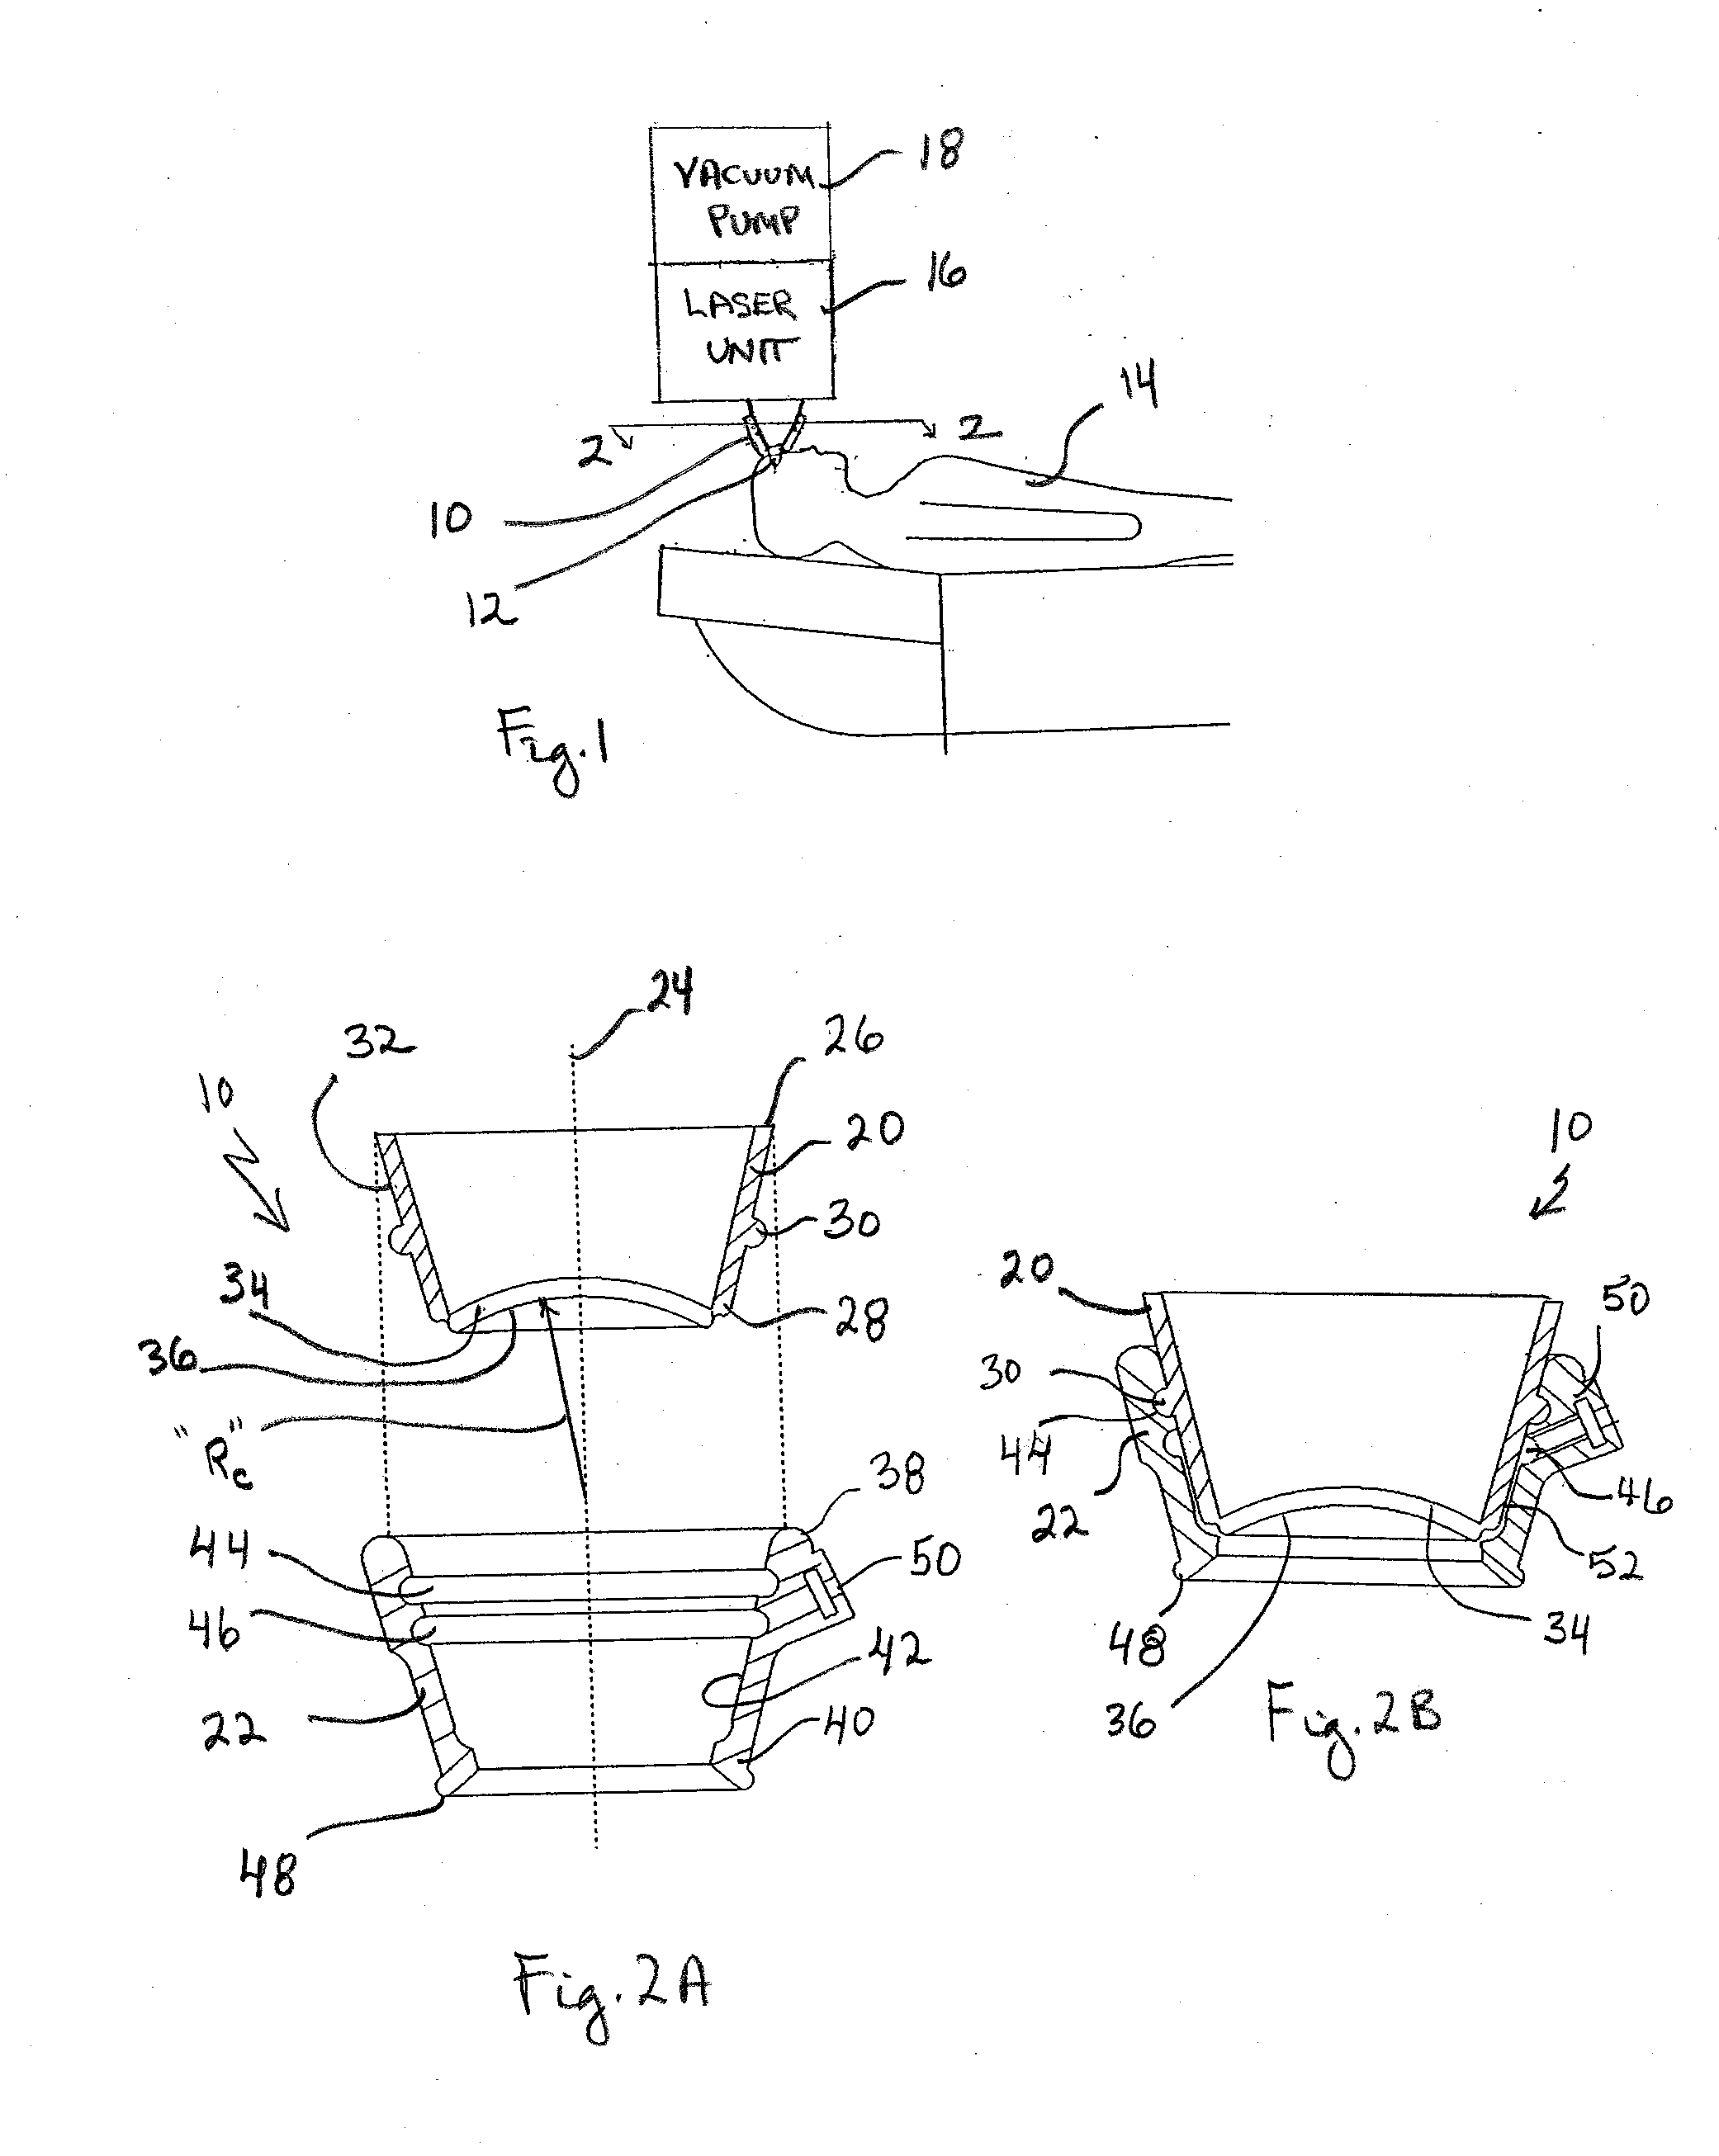 System and Method for Docking a Cornea with a Patient Interface Using Suction